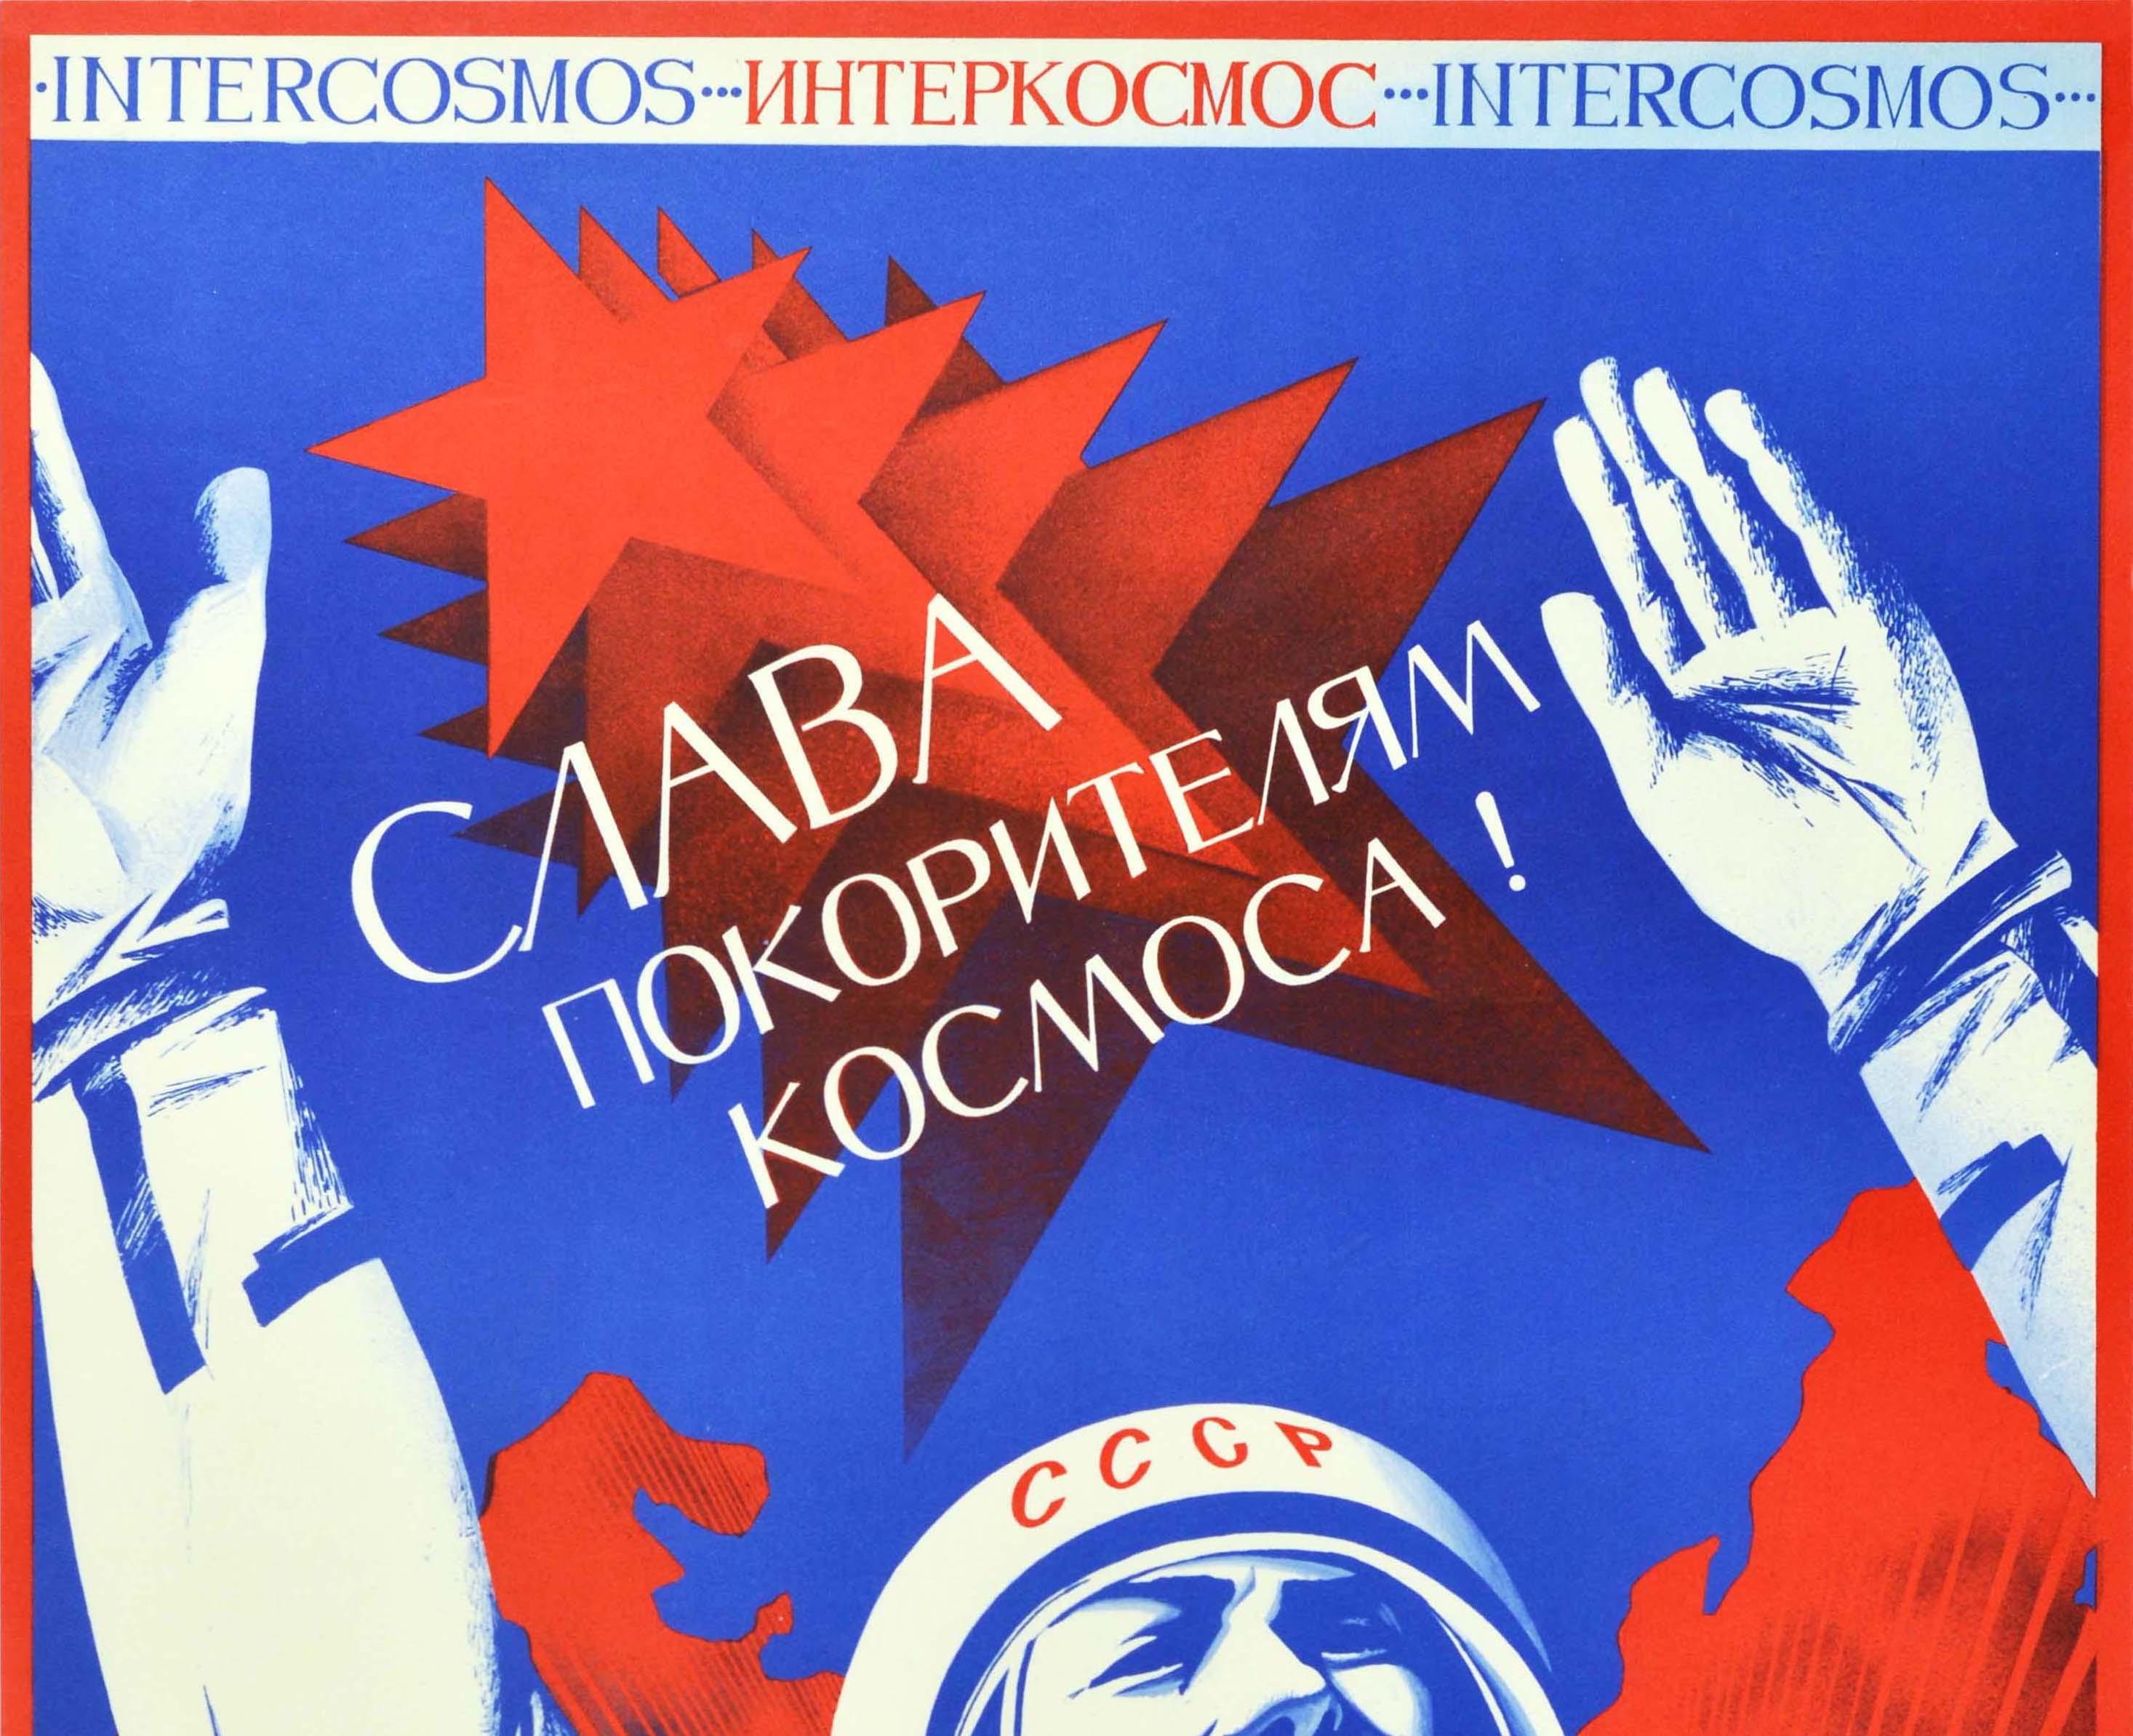 Original vintage Soviet space poster - Interkosmos Glory to the conquerors of space! / ??????????? ????? ??????????? ???????! - featuring a cosmonaut in a suit holding up his hands in celebration in front of a map of the Soviet Union in red on the